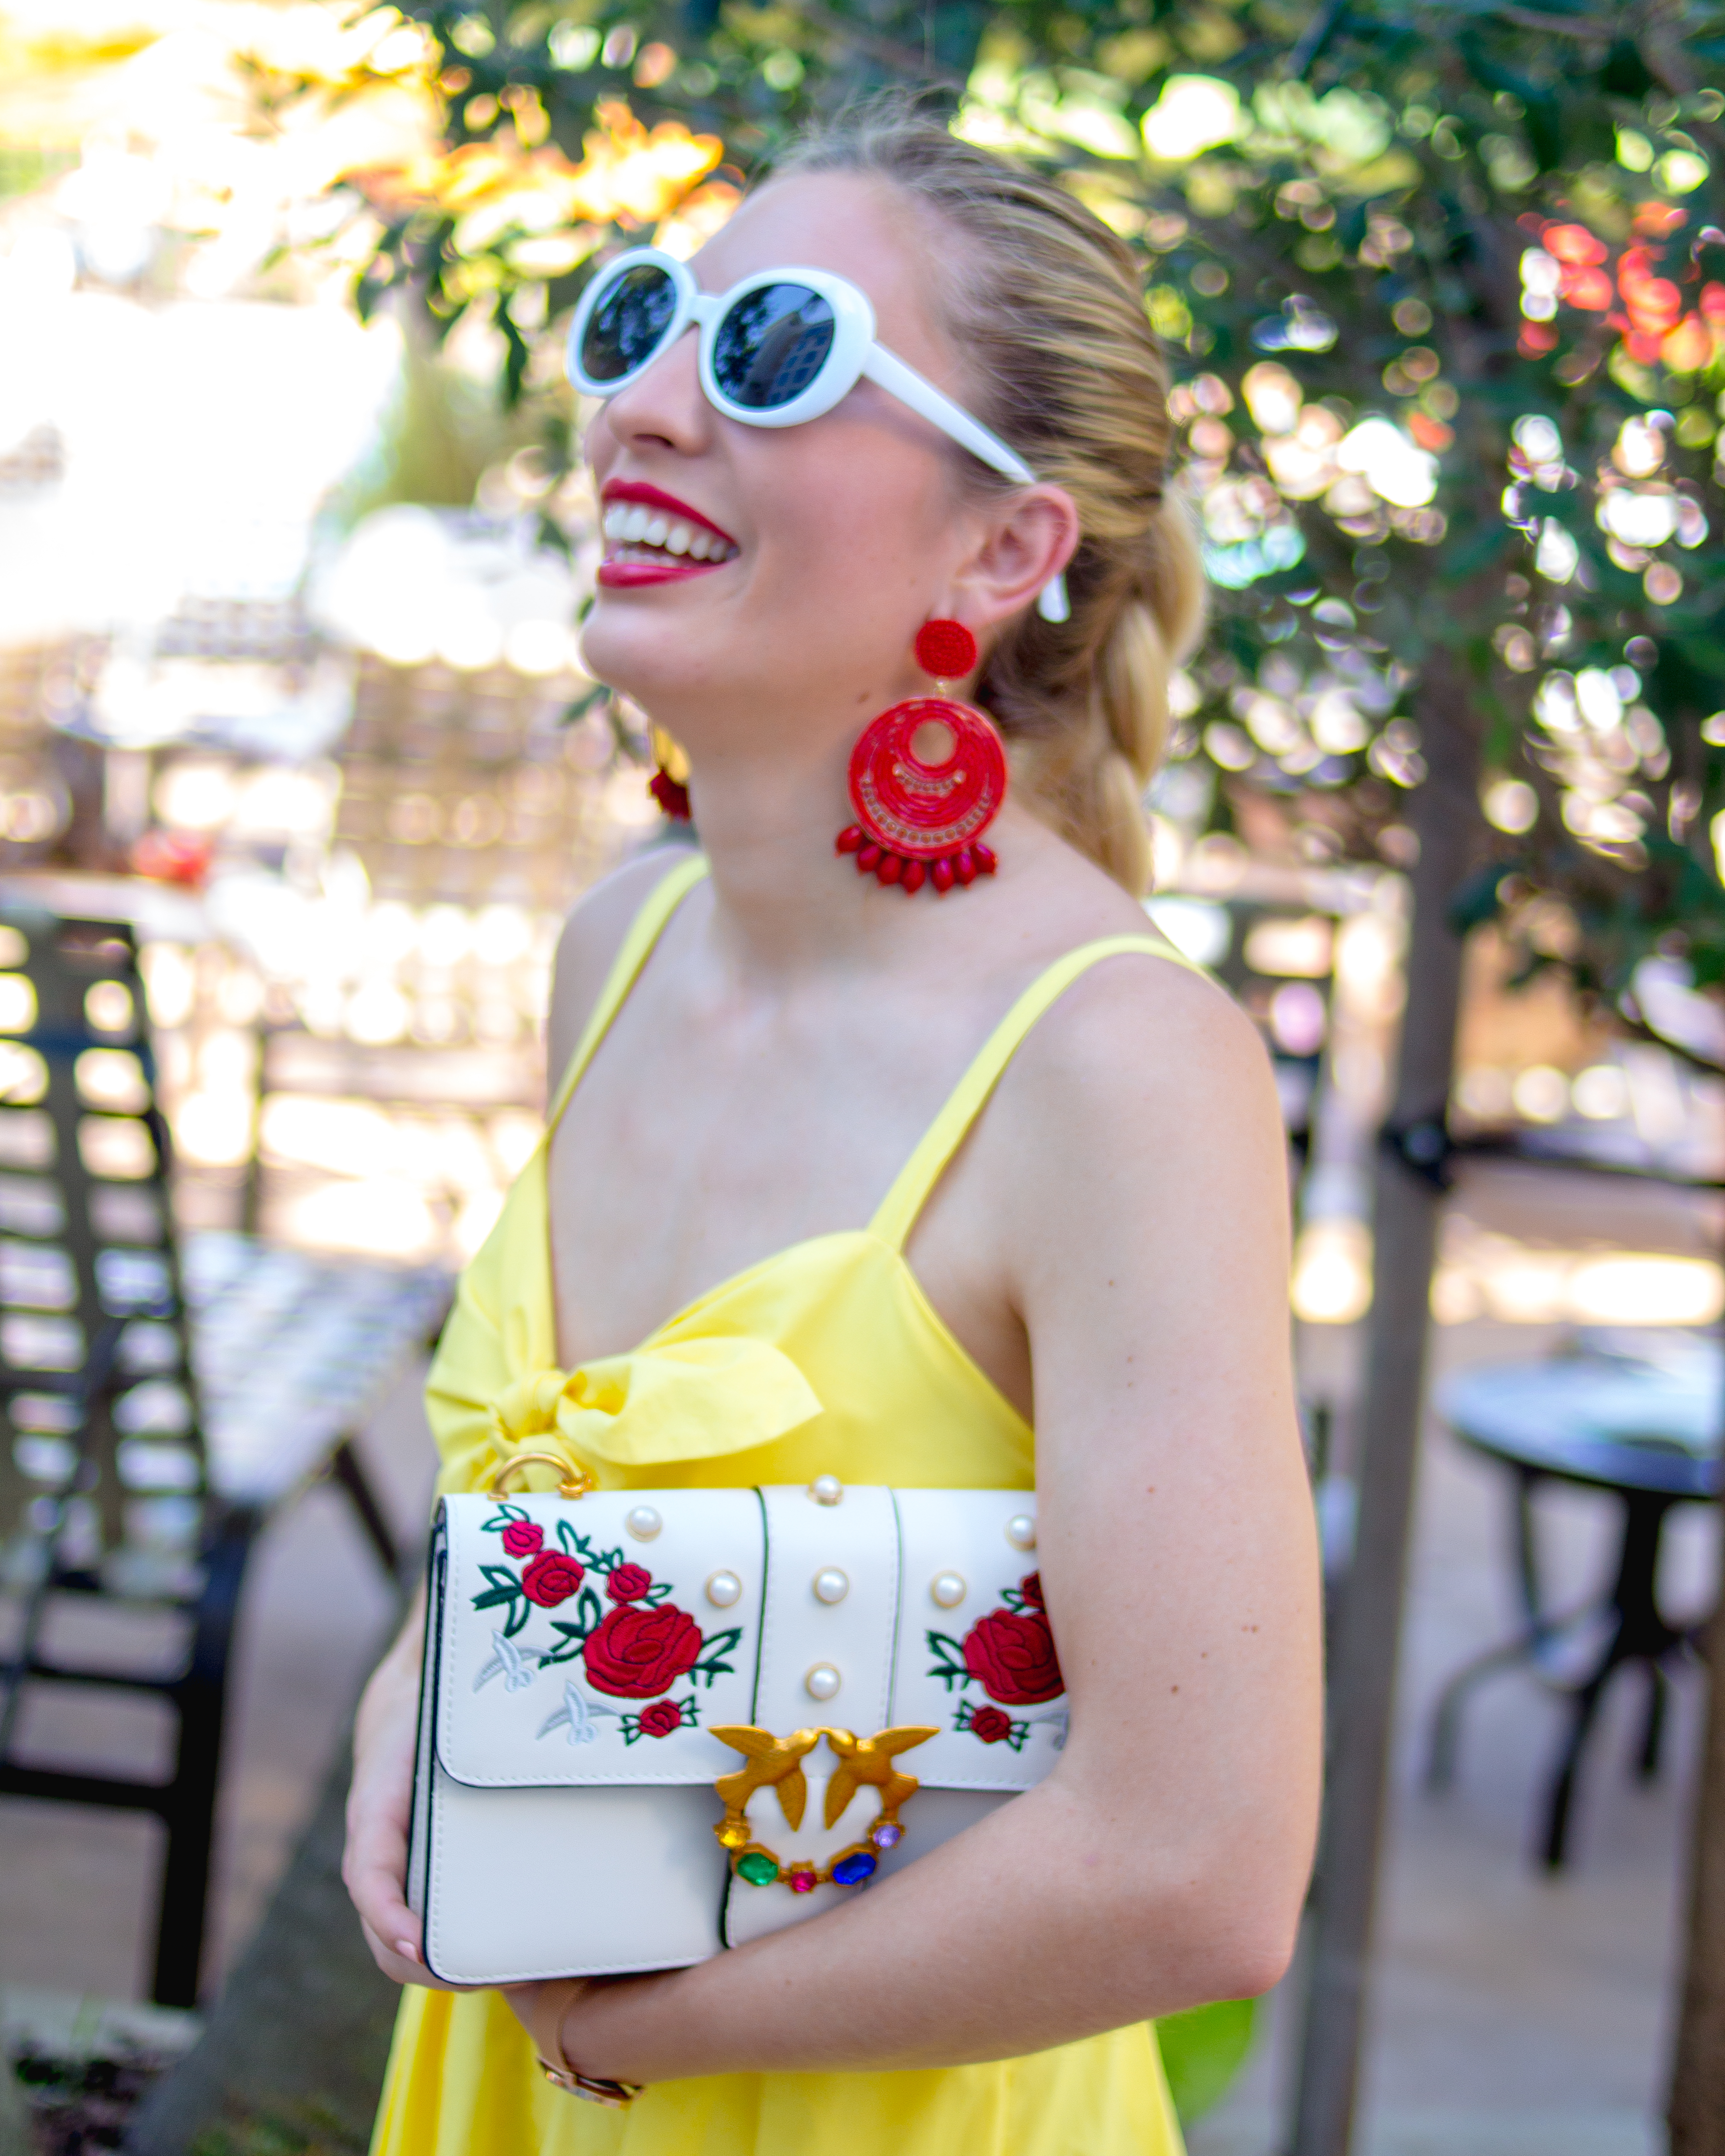 HOW TO STYLE A YELLOW DRESS